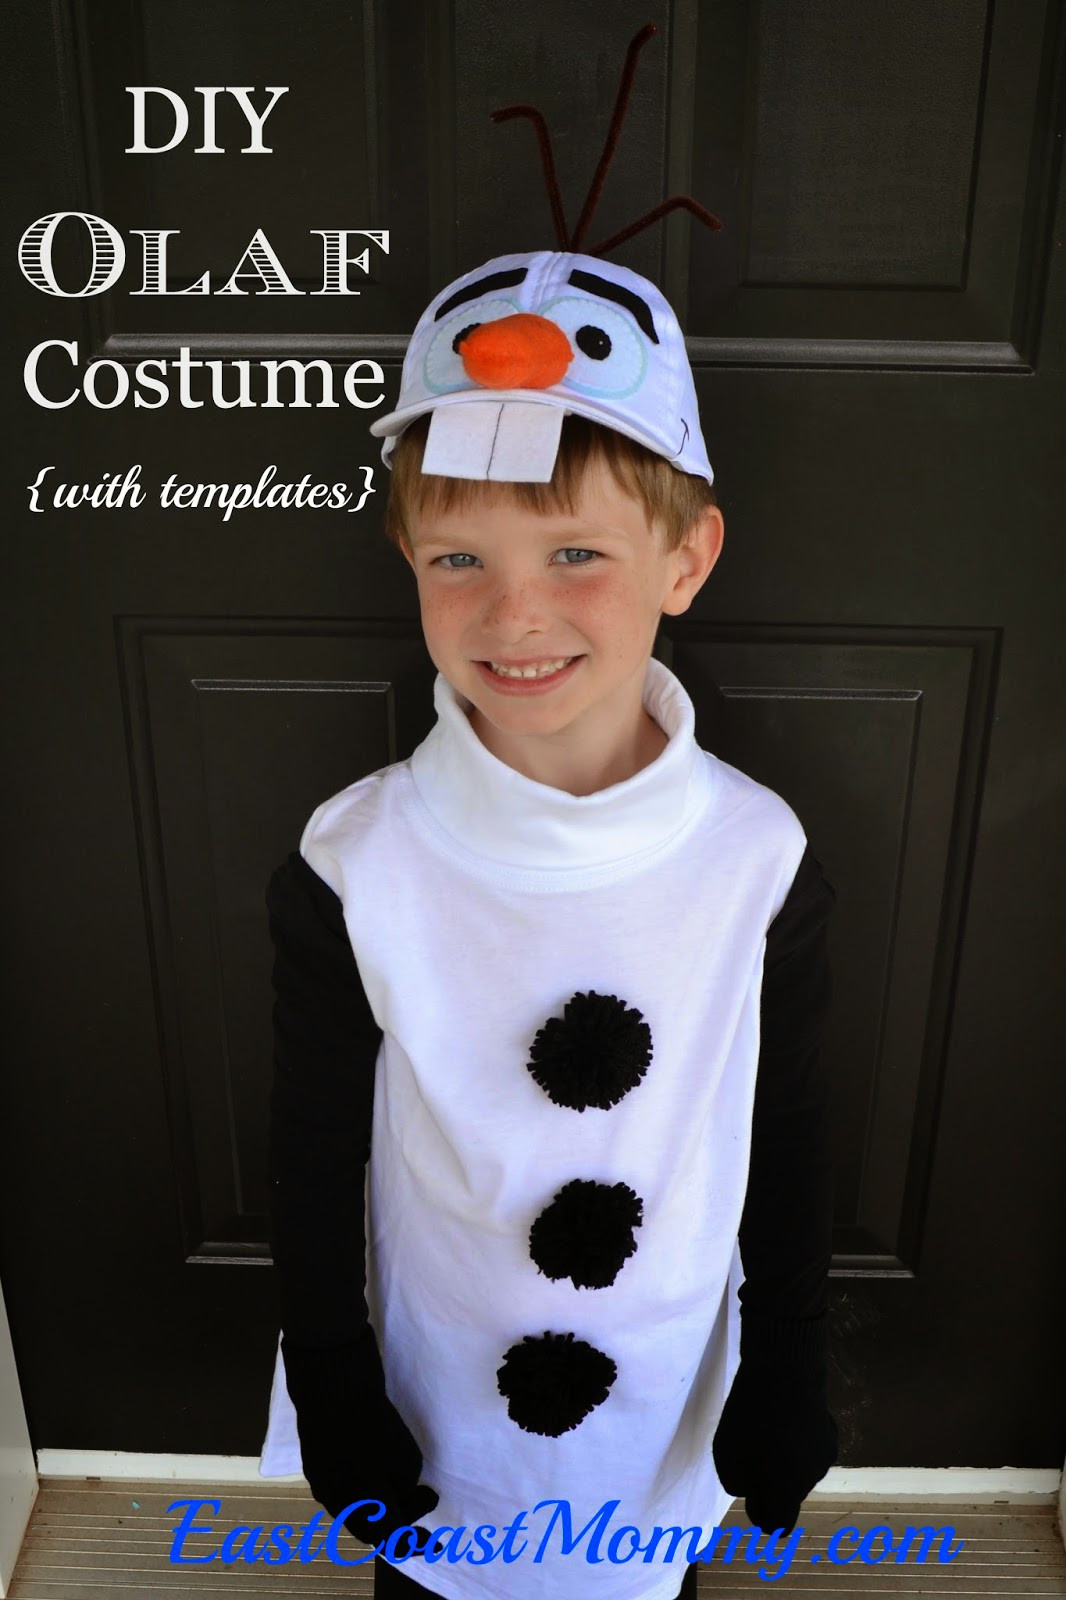 DIY Olaf Costume
 East Coast Mommy 20 Awesome No Sew Costumes for Kids